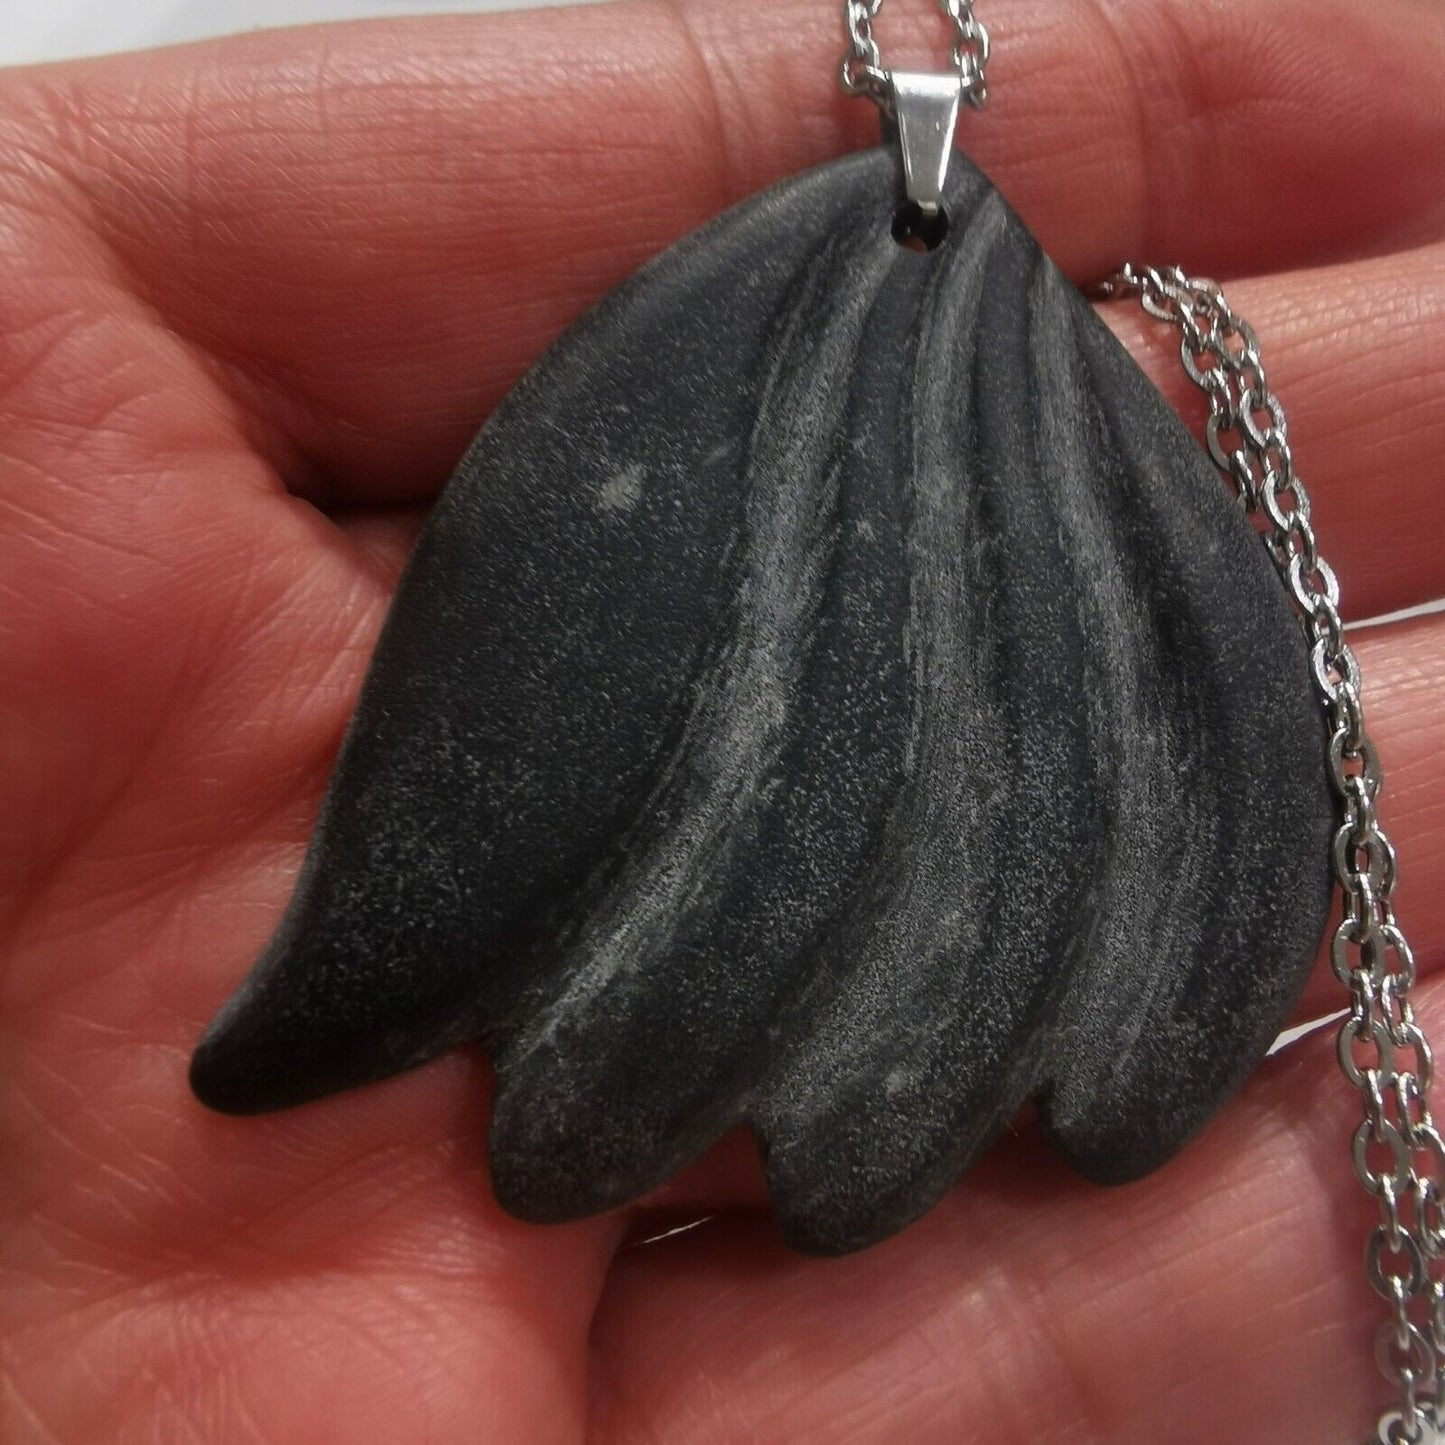 HandCarved Black Stone Pendant With Stainless Steel Chain Necklace